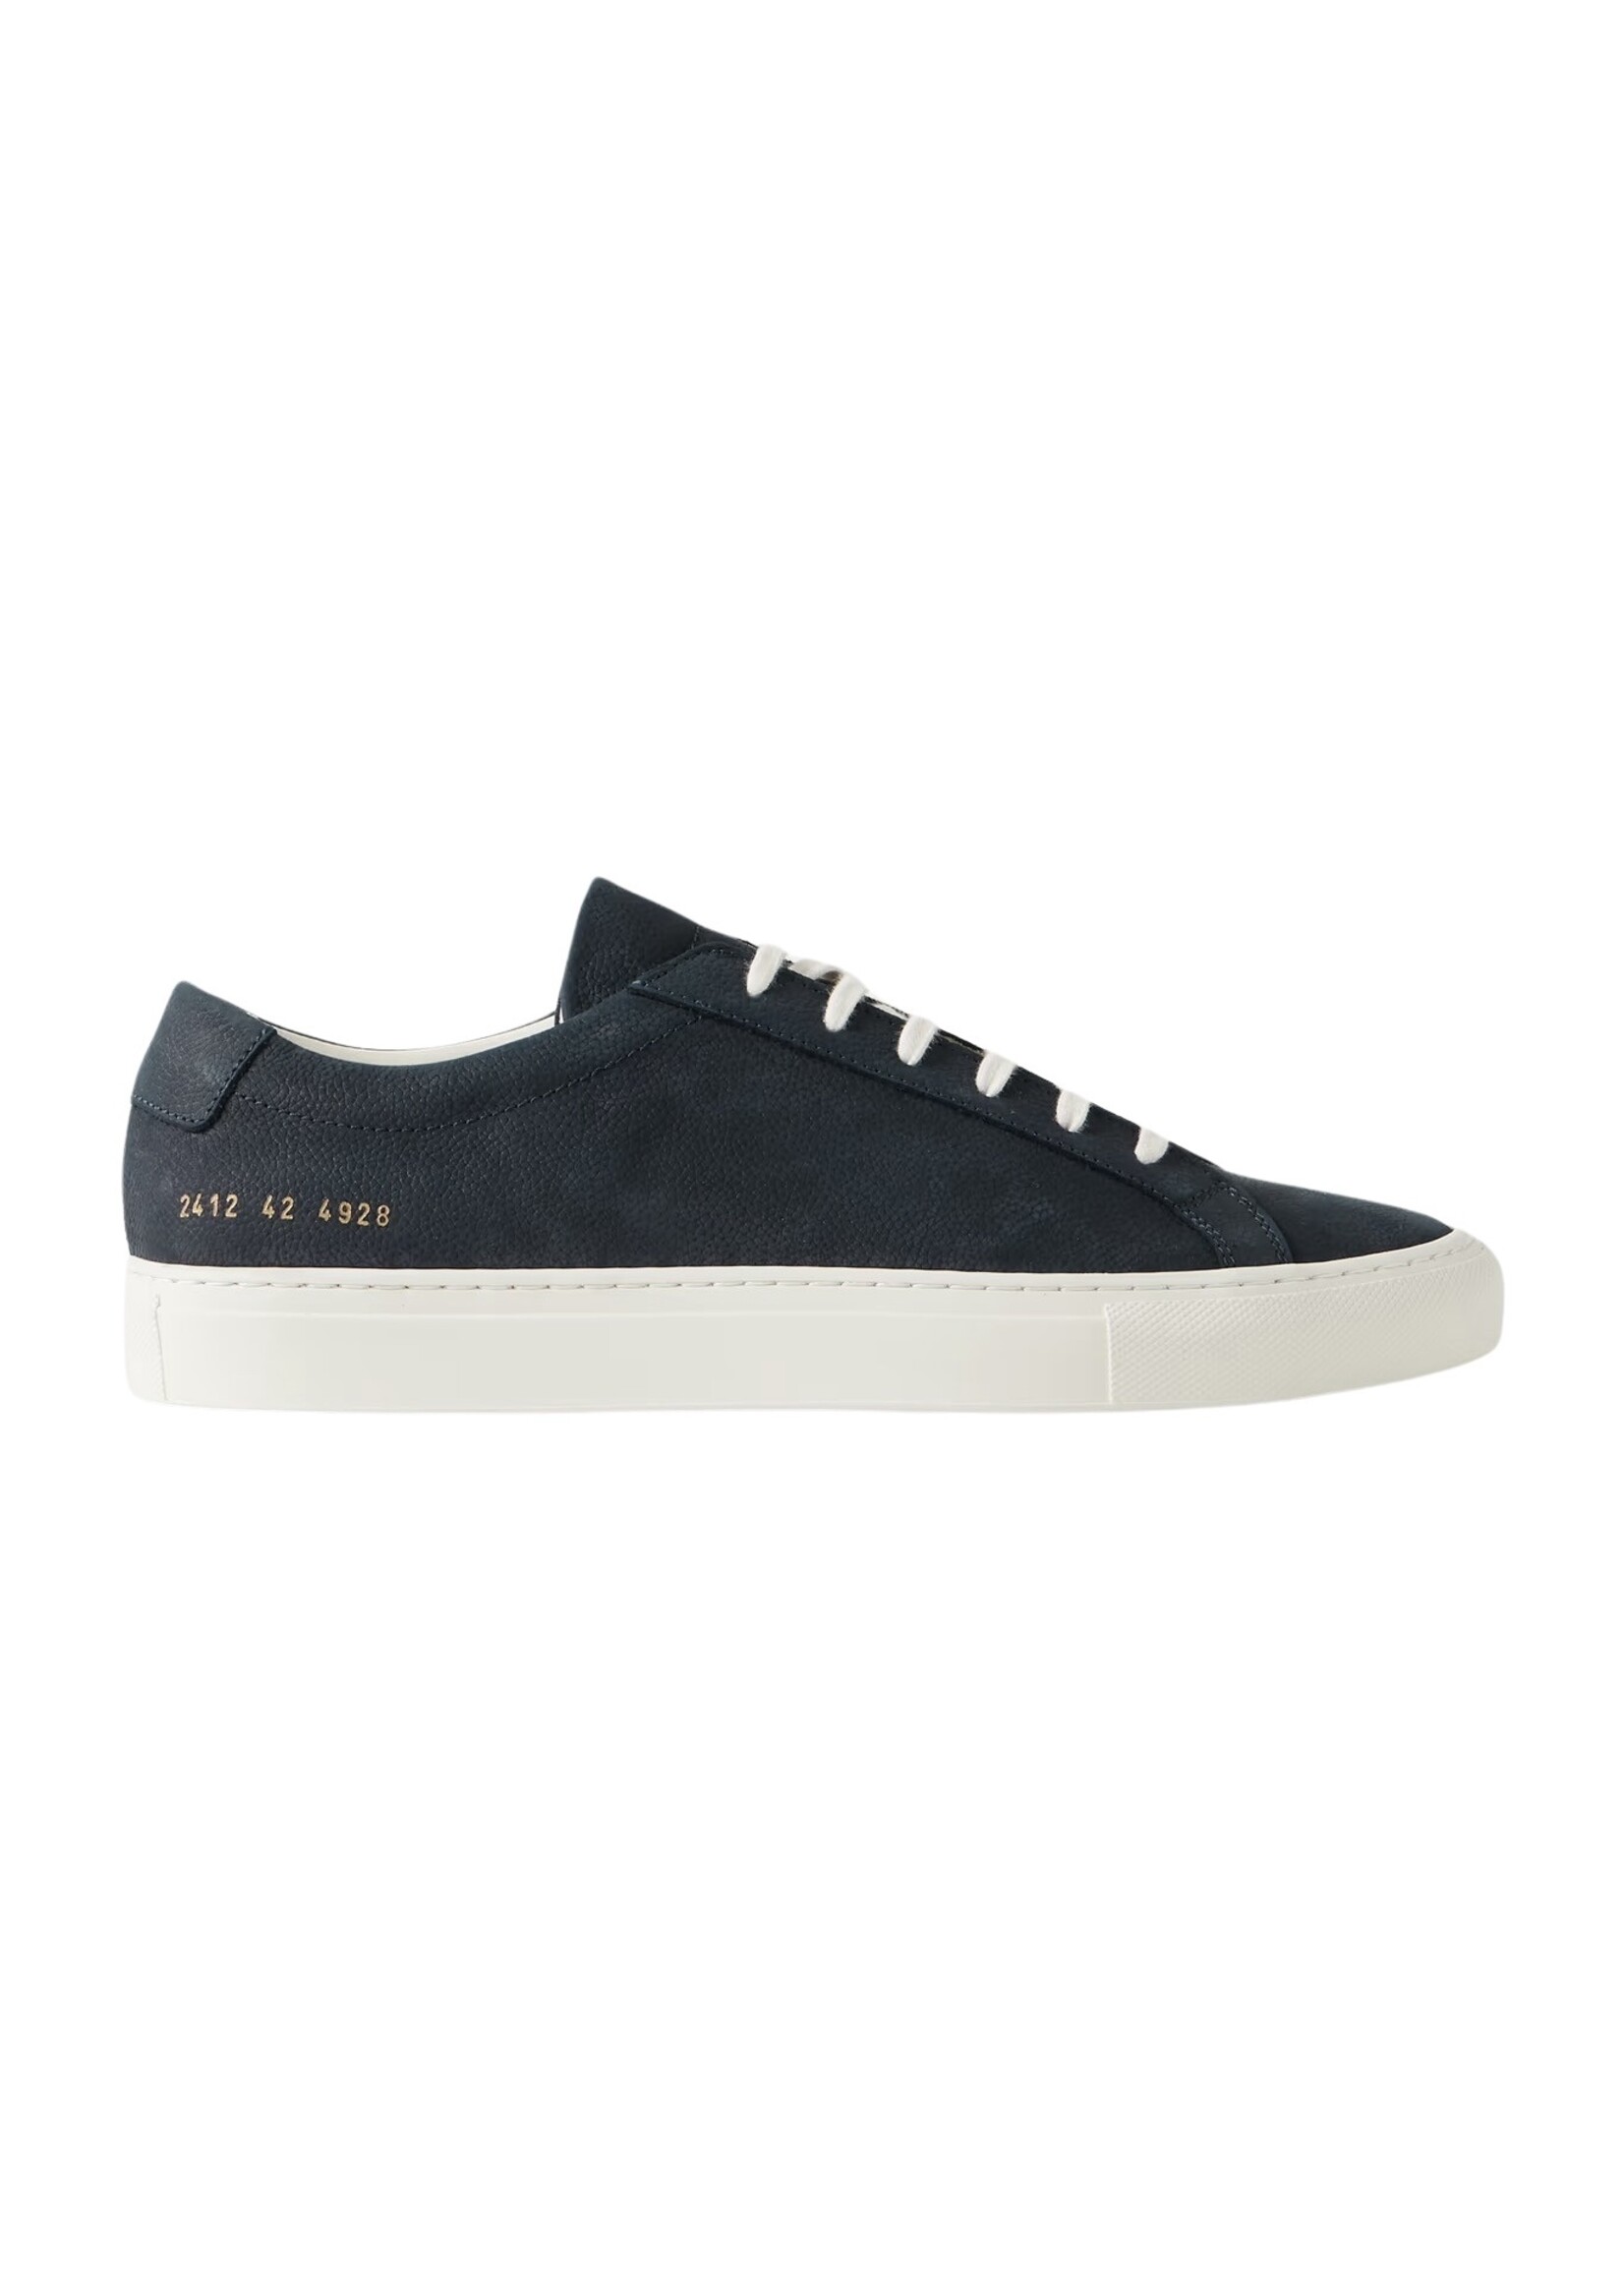 COMMON PROJECTS CONTRAST ACHILLES SNEAKER